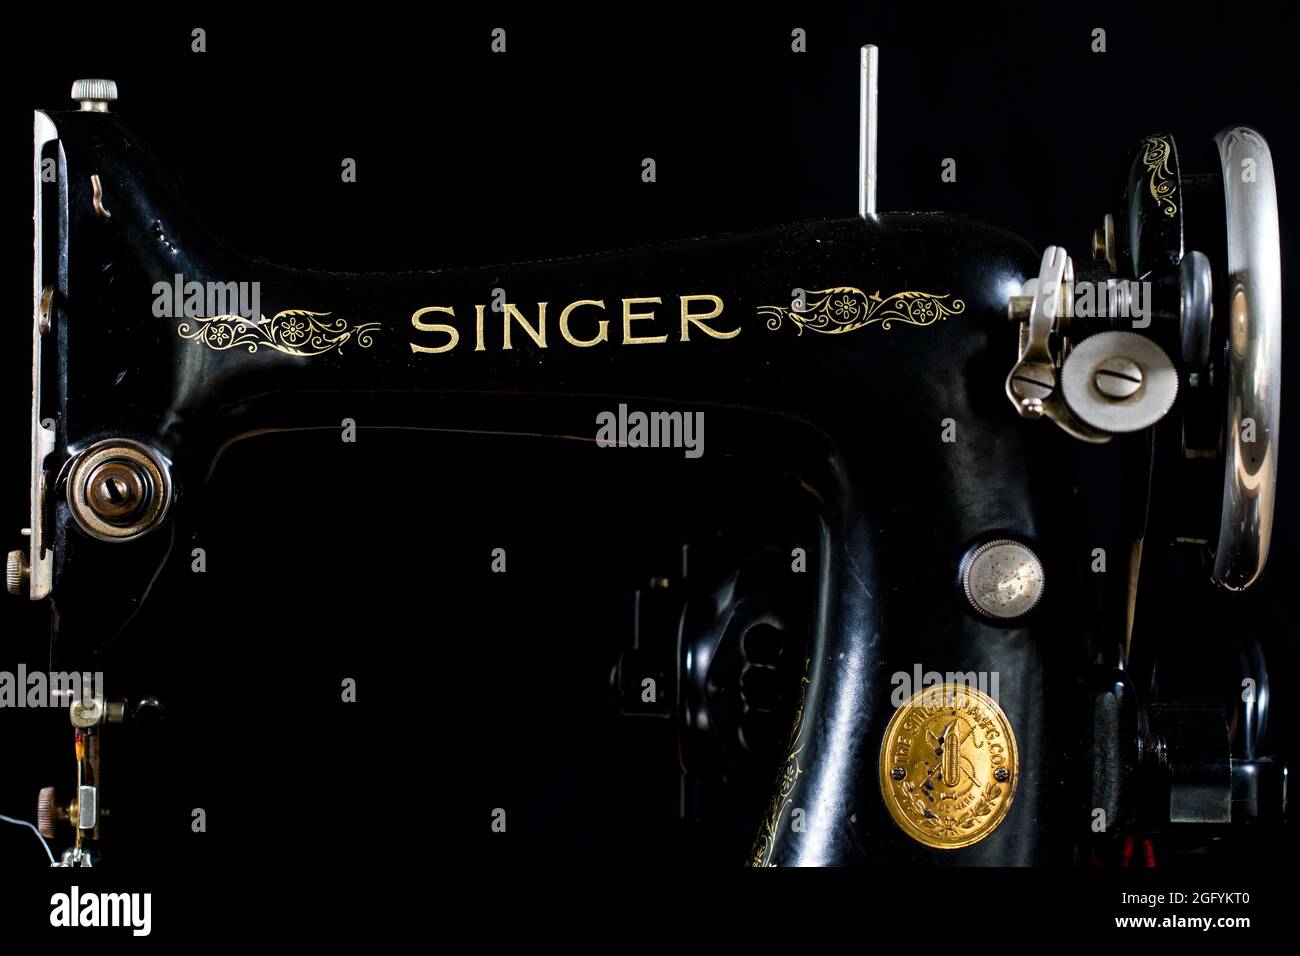 Singer 99k vintage sewing machine. Classic portable sewing machine close up. Stock Photo